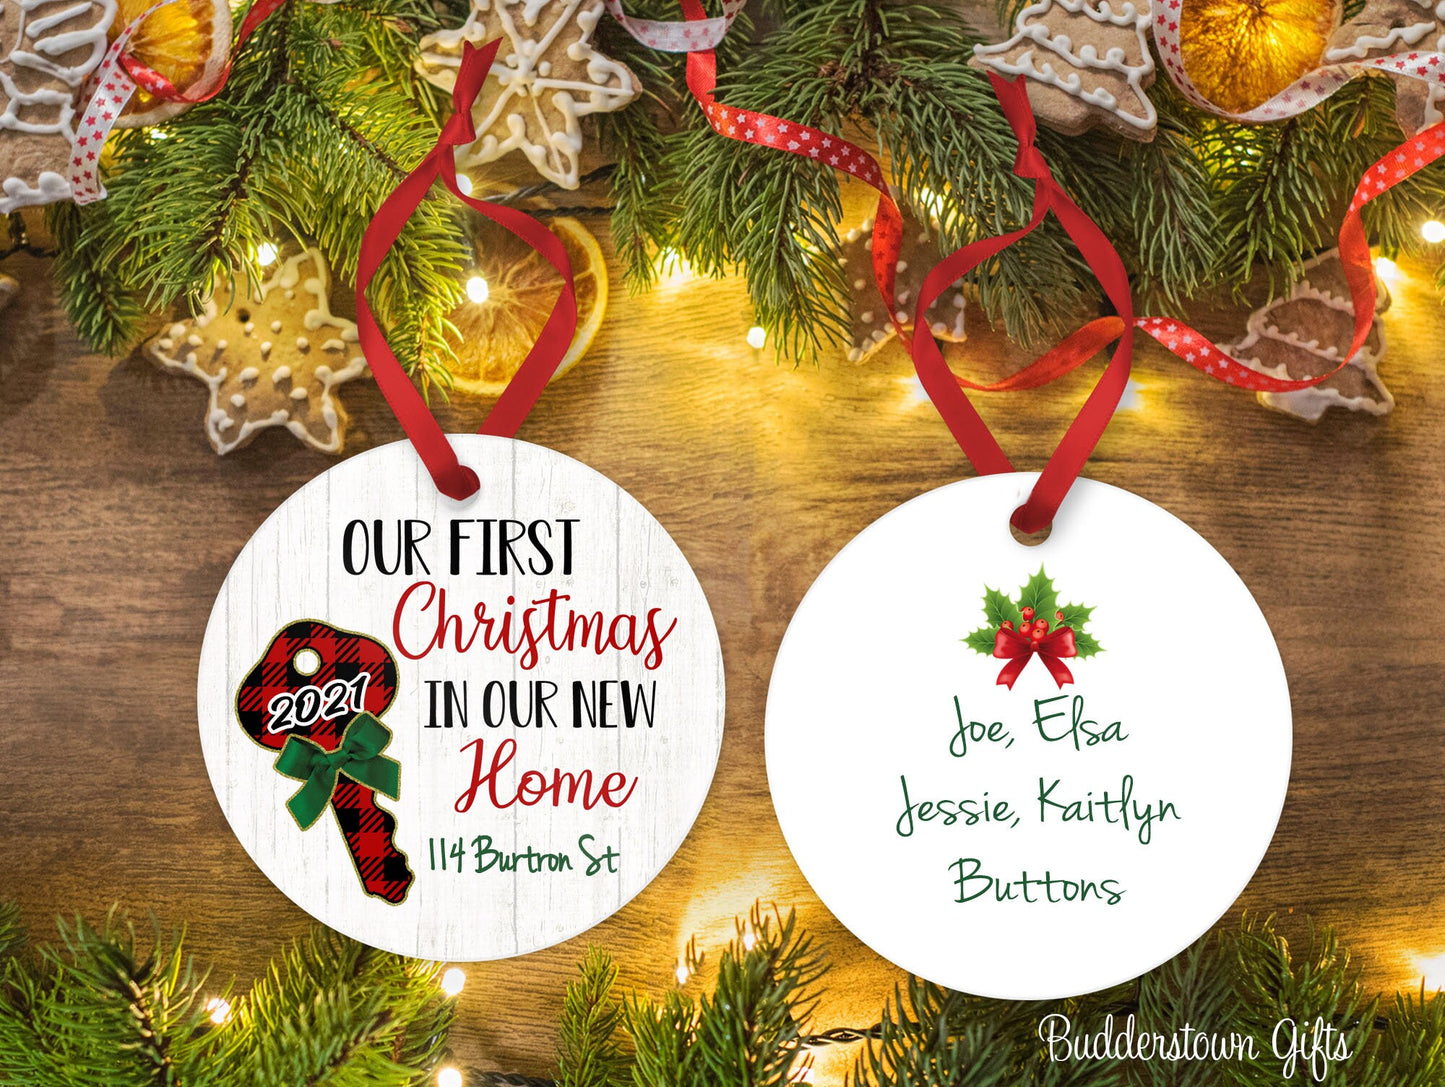 Our First Christmas in our New Home PLAIDKEY -New Home, Personalized Ornament